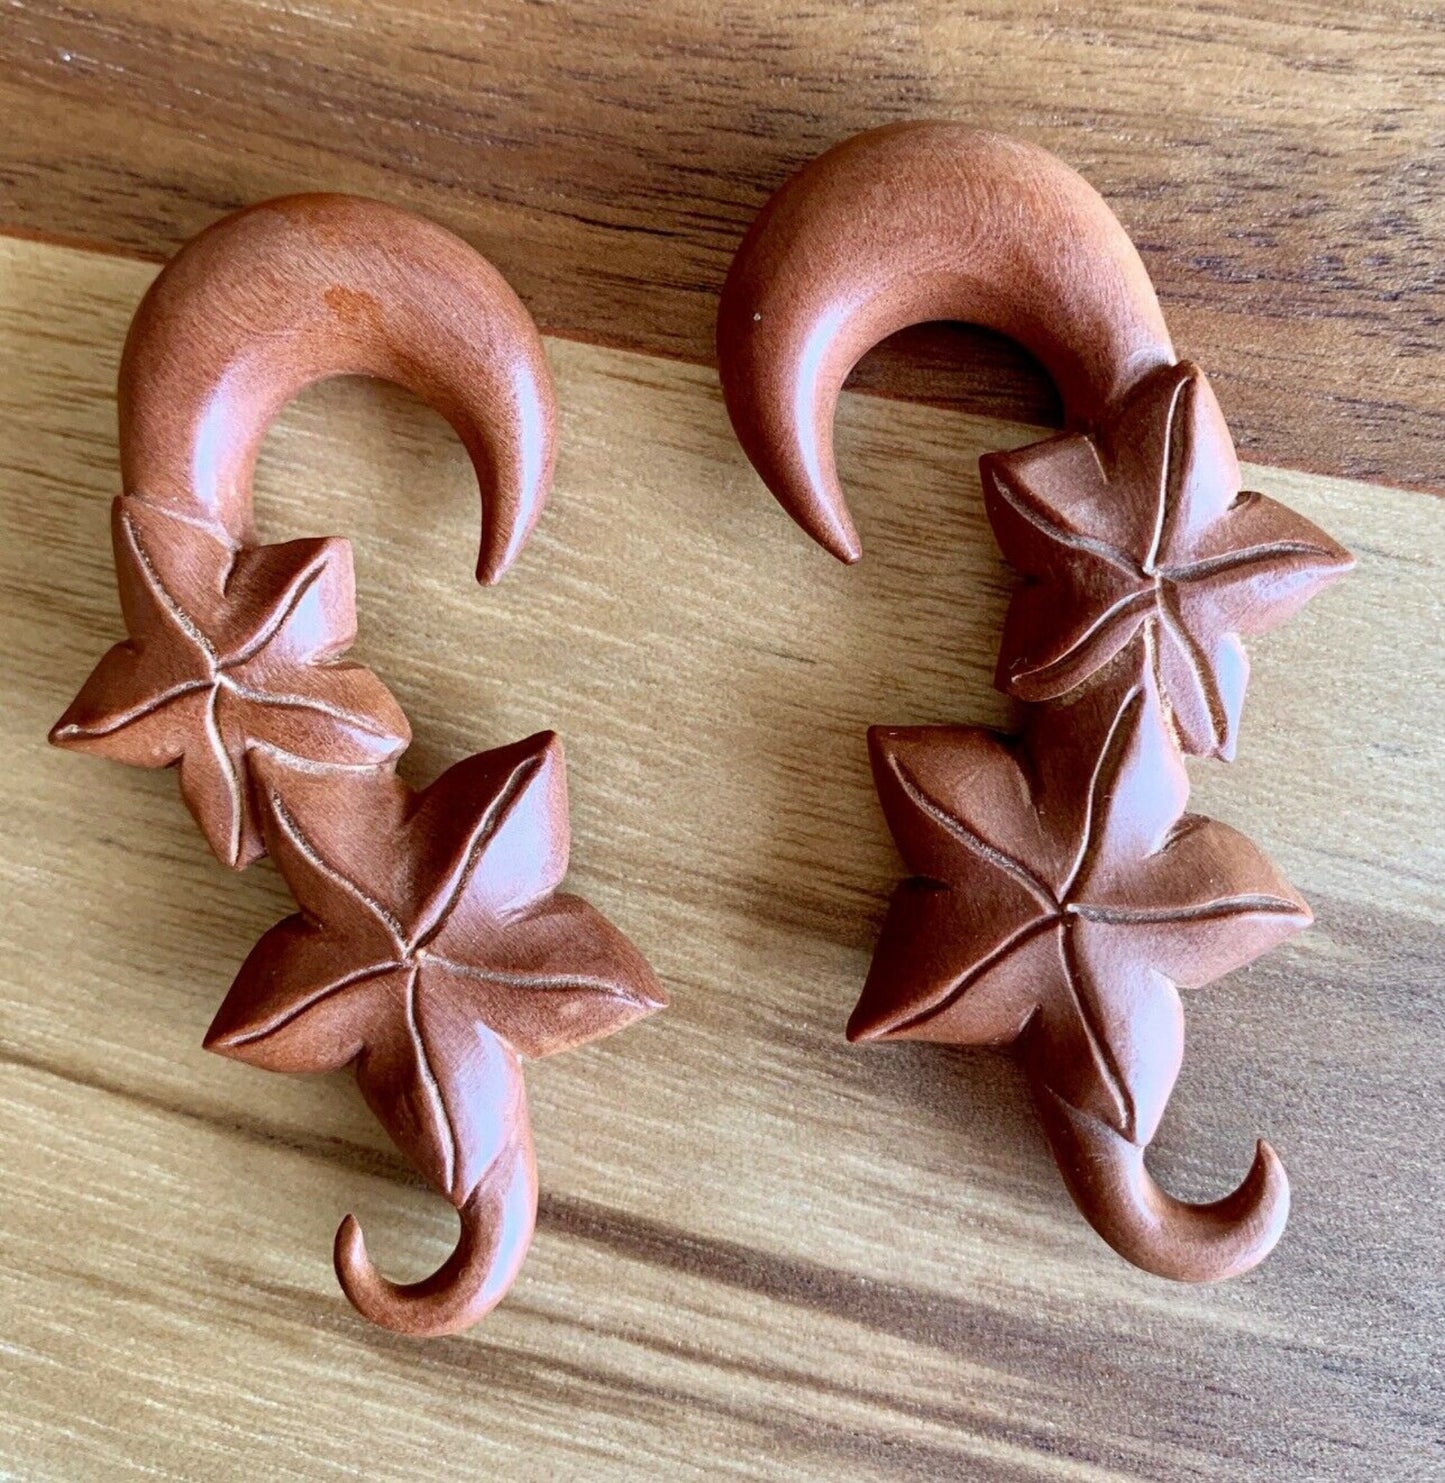 PAIR of Unique Organic Leaves Saba Wood Expanding Tapers - Gauges 6g (4mm) up to 7/16" (11mm) available!